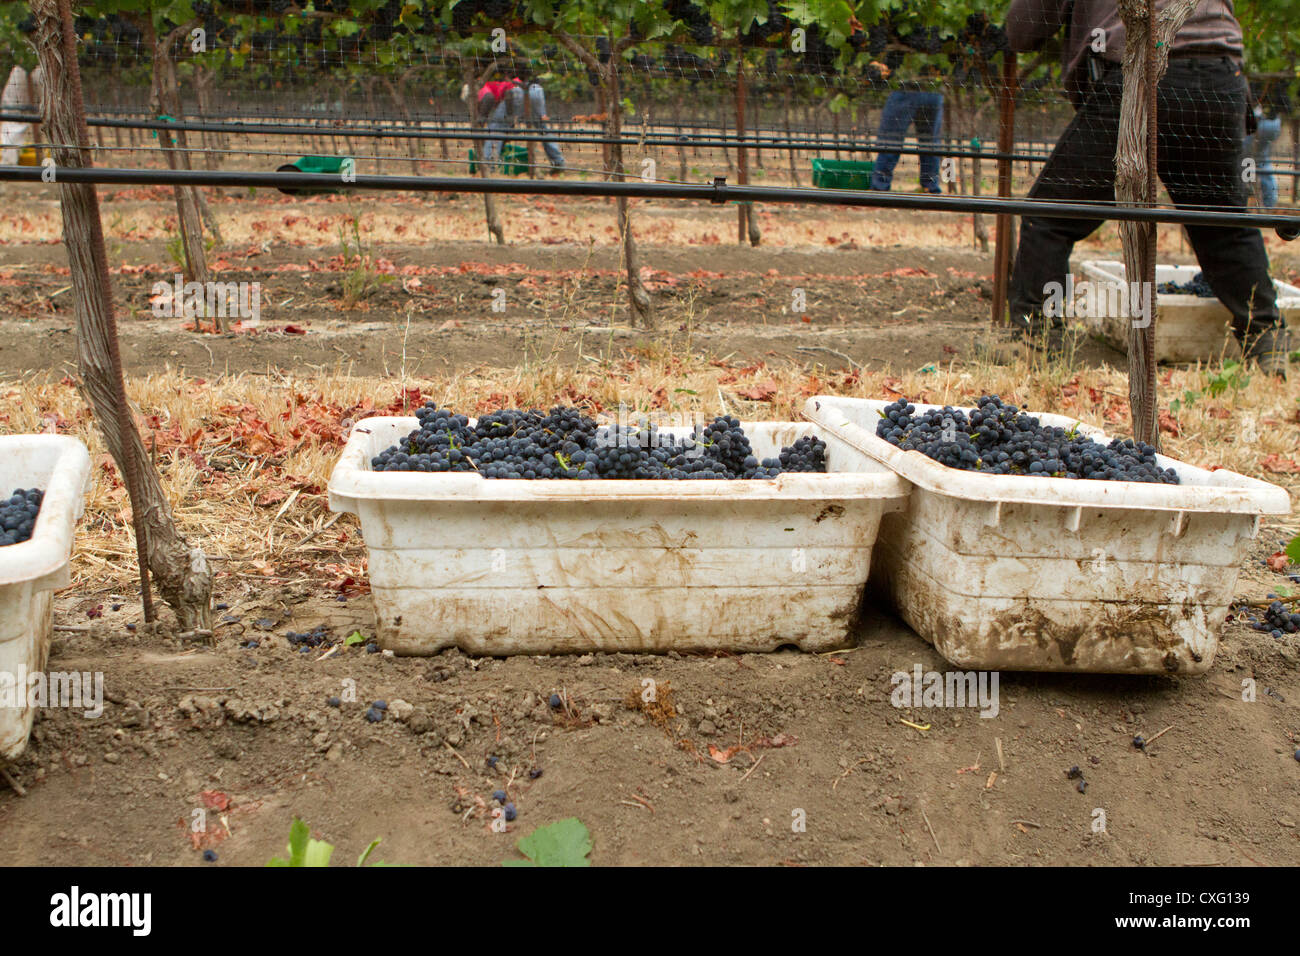 Full bins of Pinot Noir grapes with workers in the background. Stock Photo